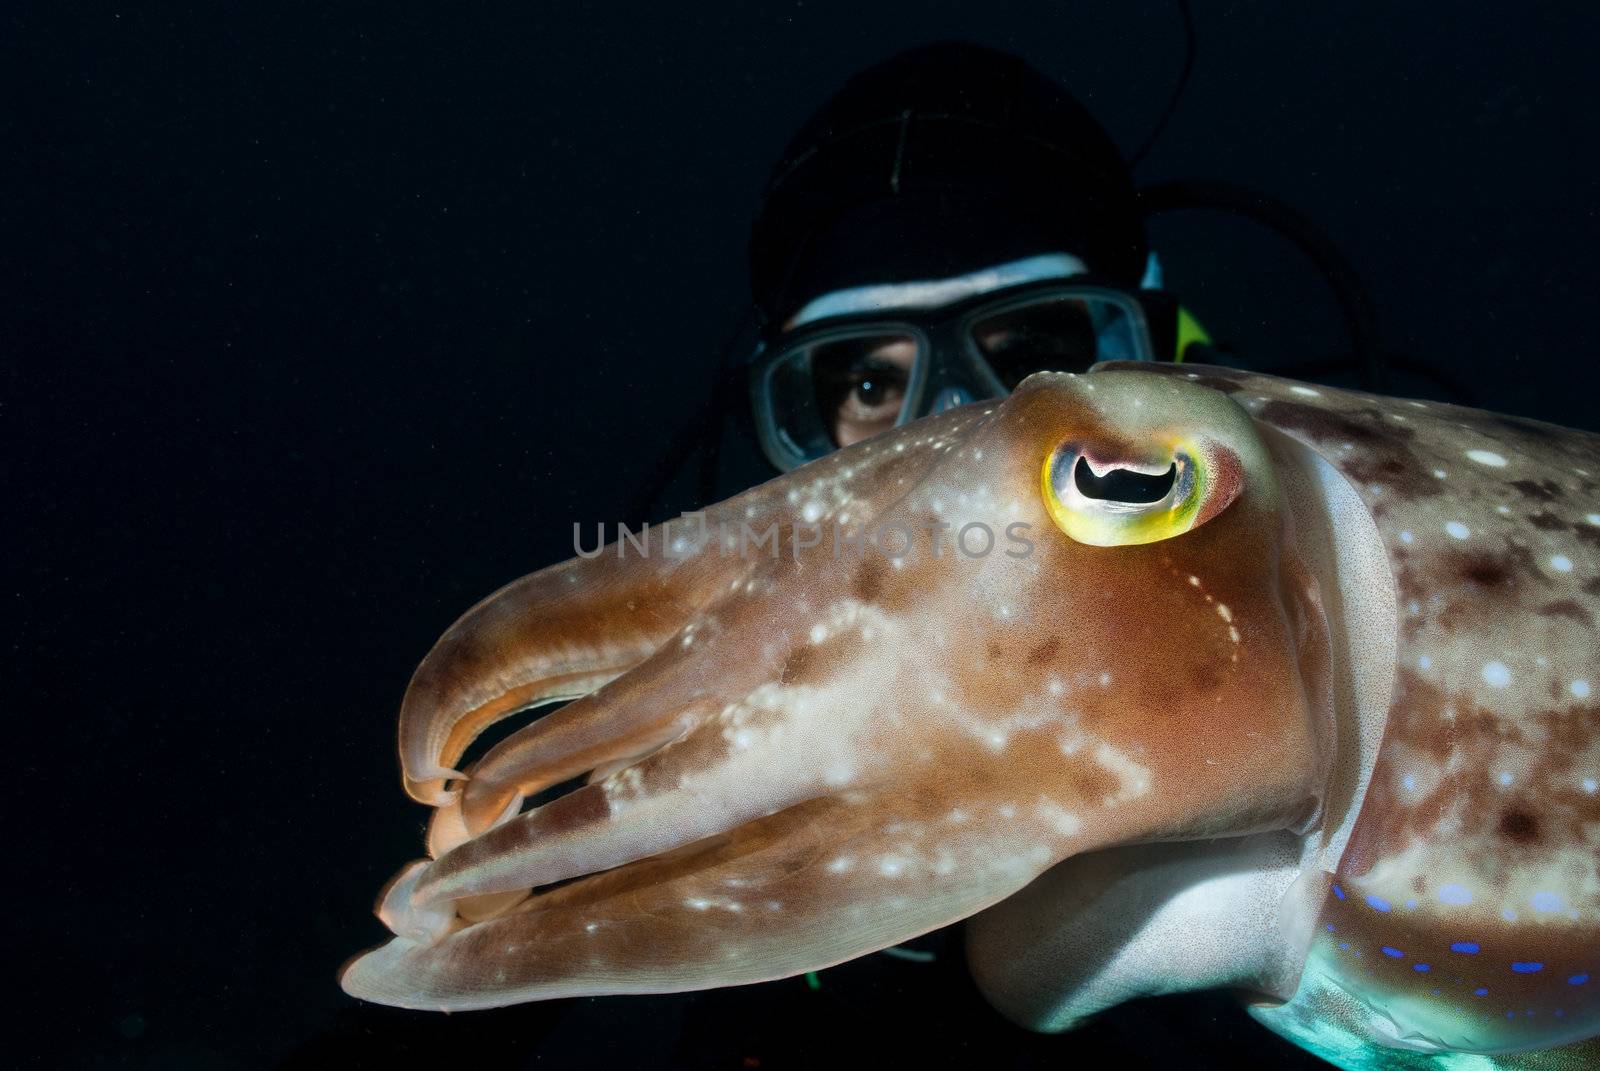 Cuttlefish and diver appearing together in waters of Bangka, Indonesia